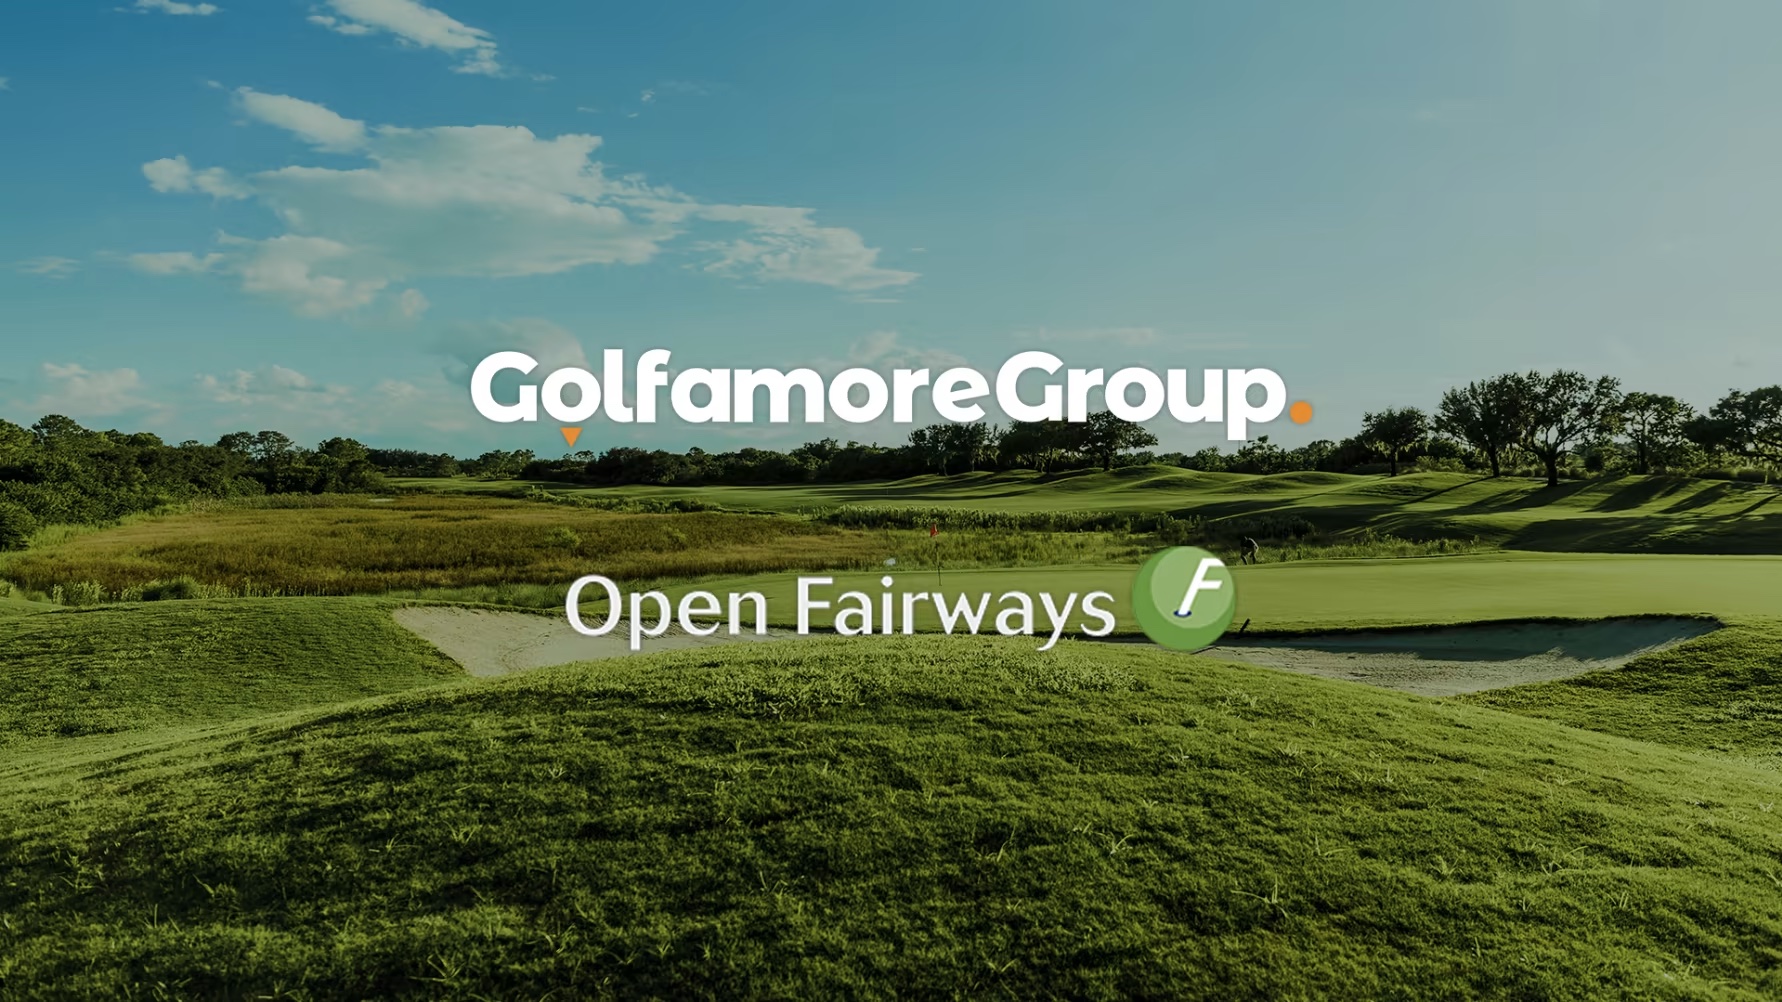 Golfamore Group acquires Open Fairways in the UK